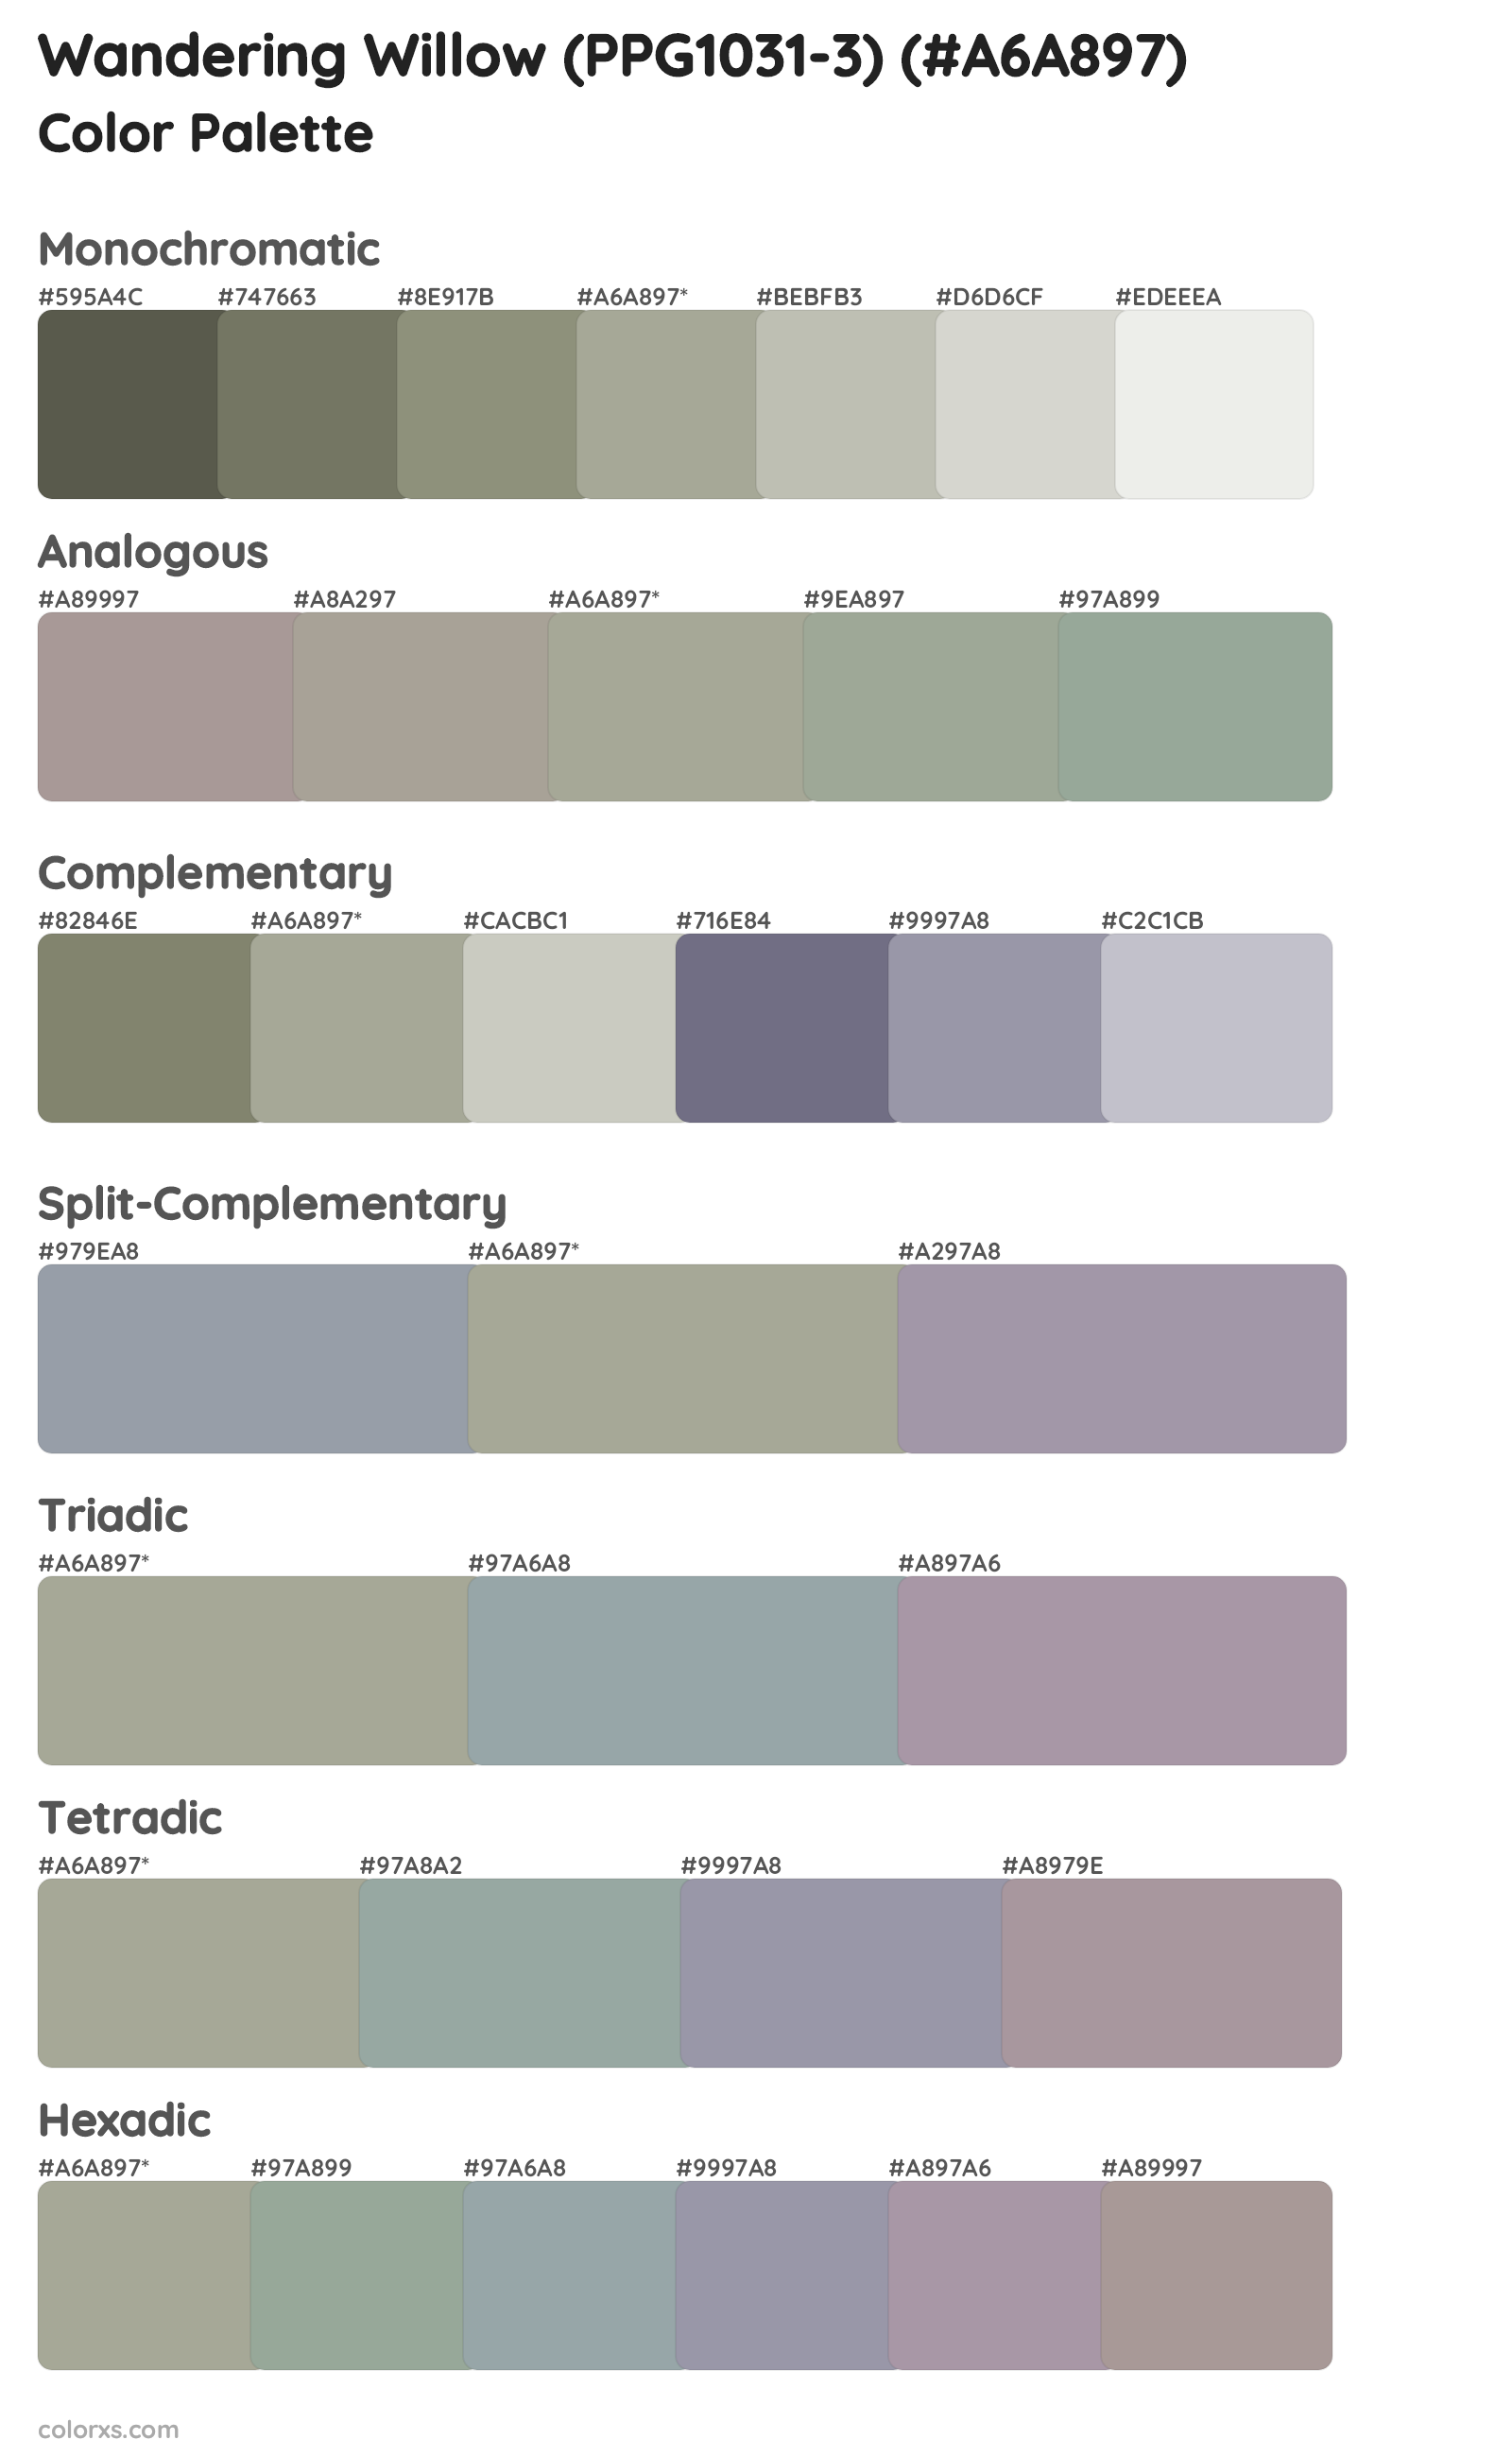 Wandering Willow (PPG1031-3) Color Scheme Palettes